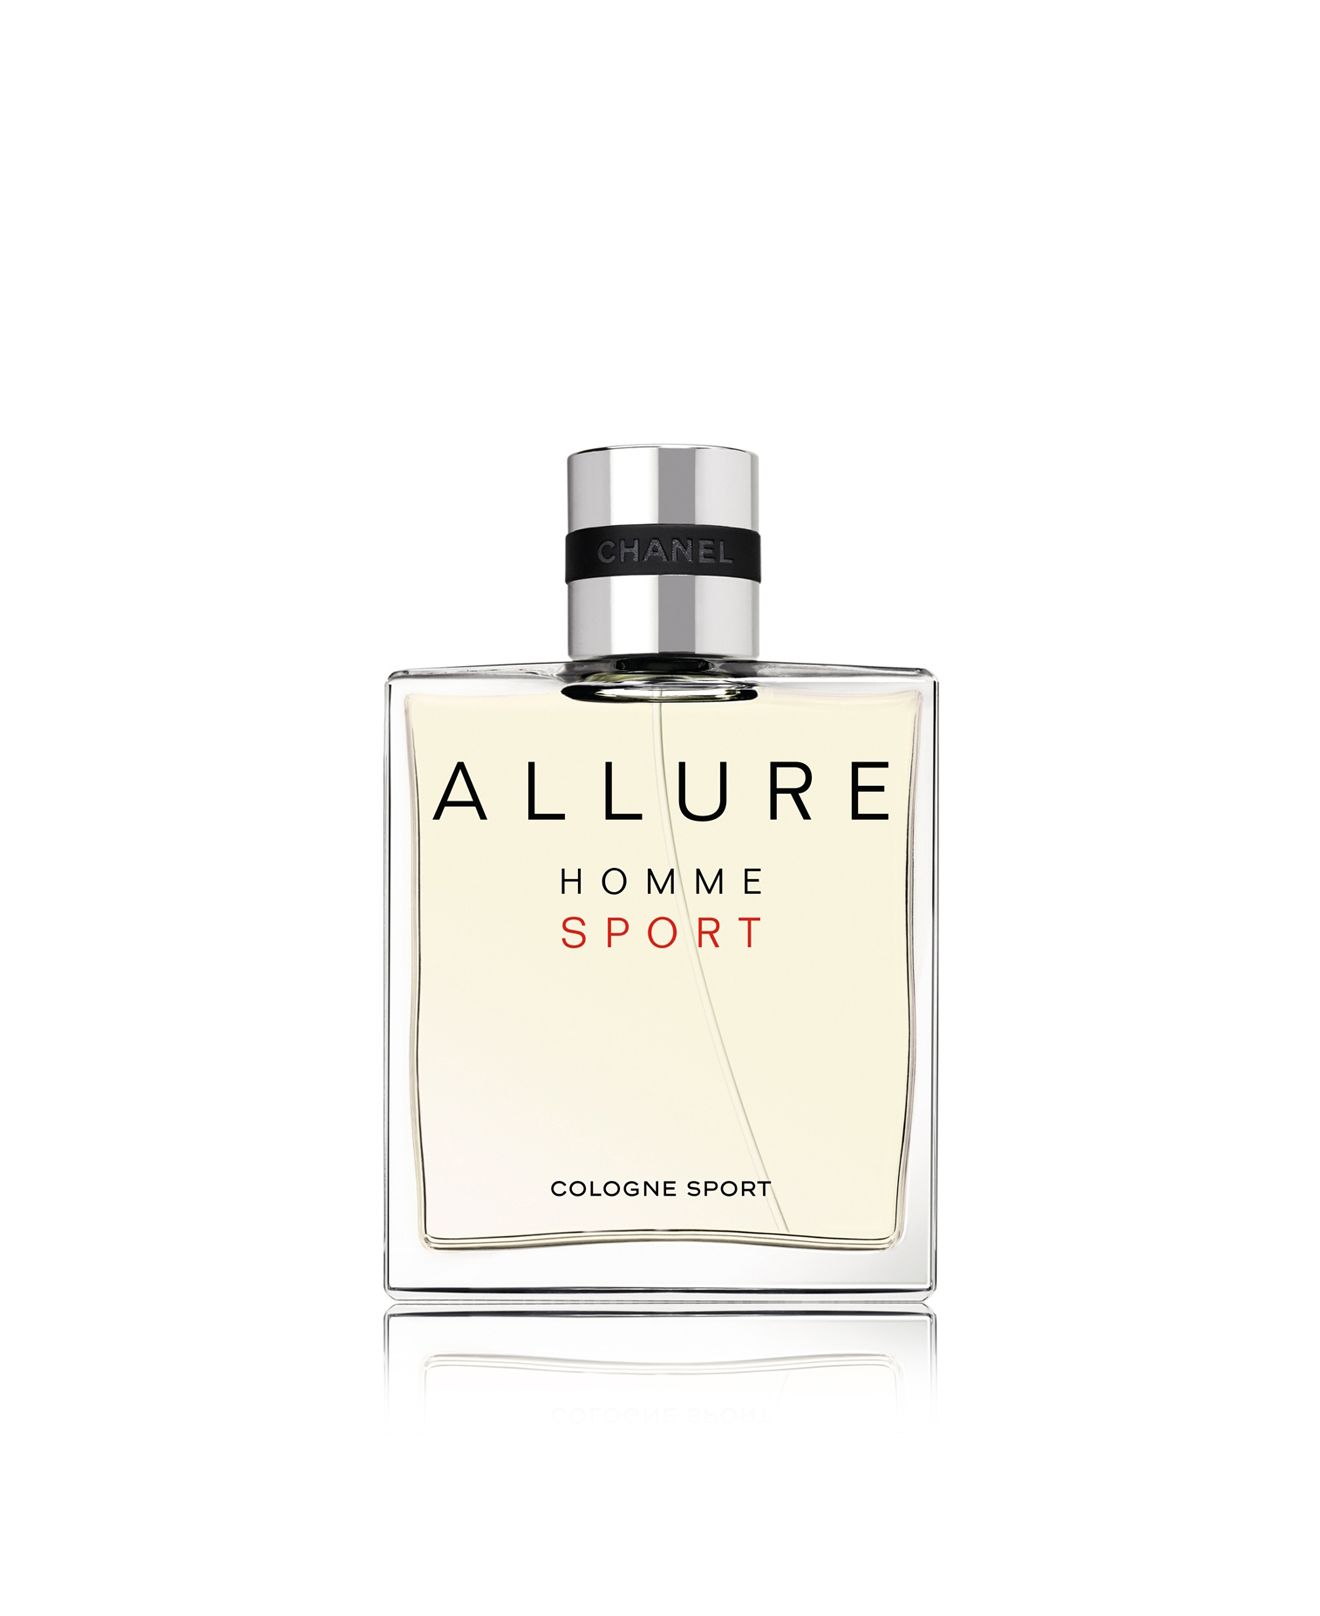 What aftershave/perfume do you wear?